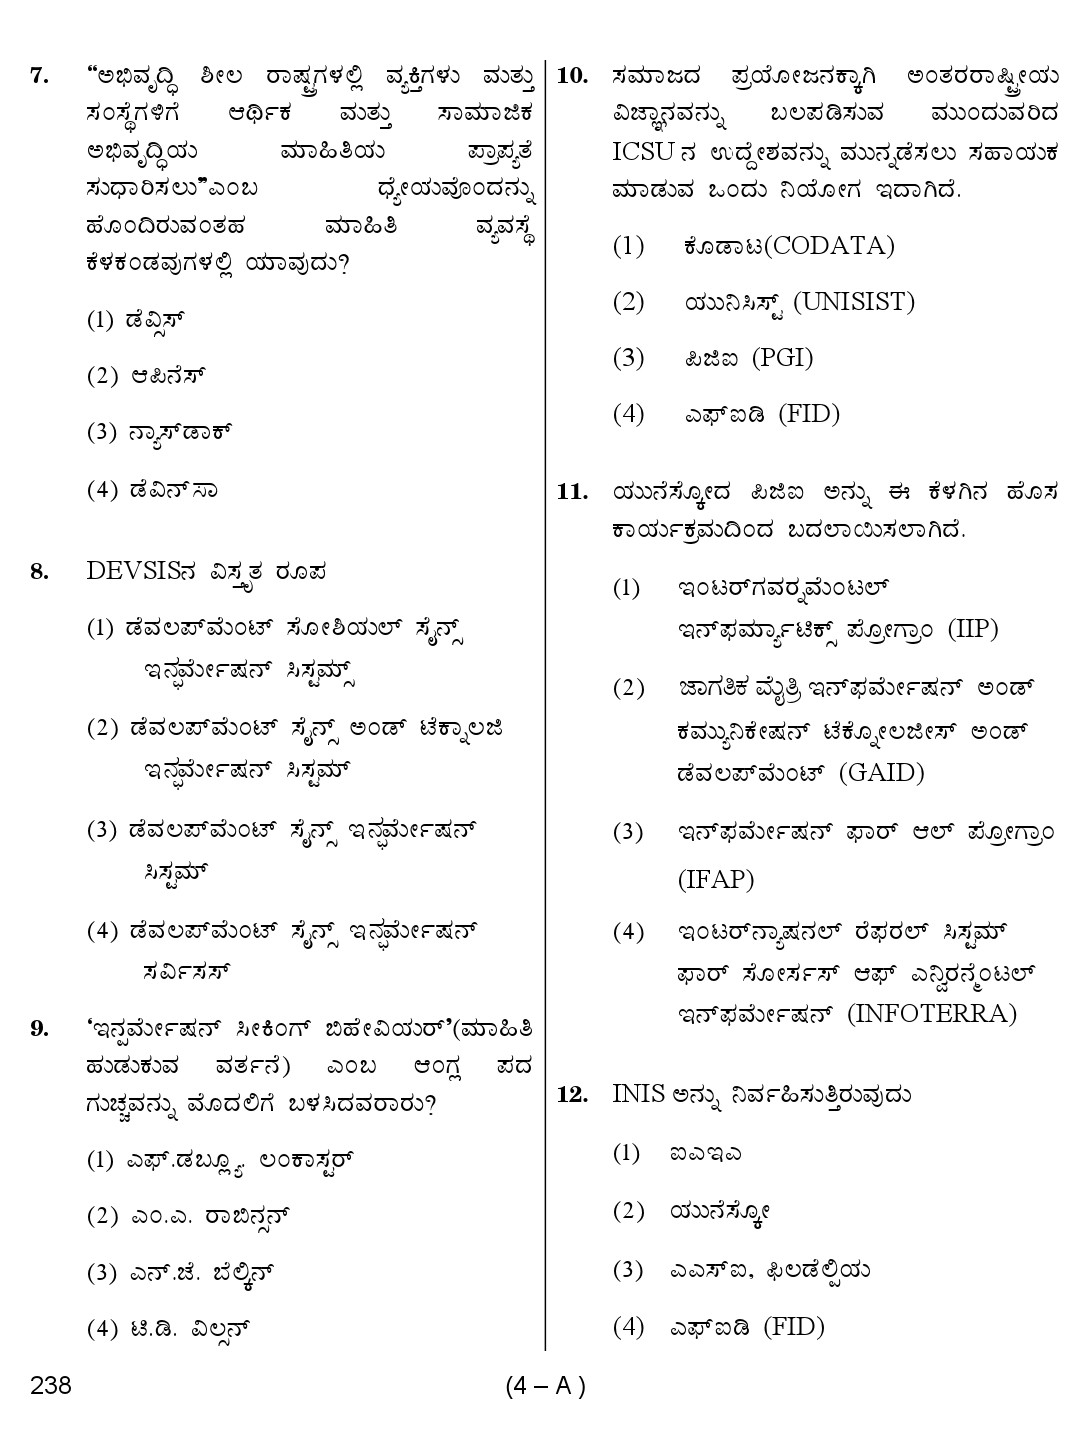 Karnataka PSC 238 Specific Paper II Librarian Exam Sample Question Paper 4